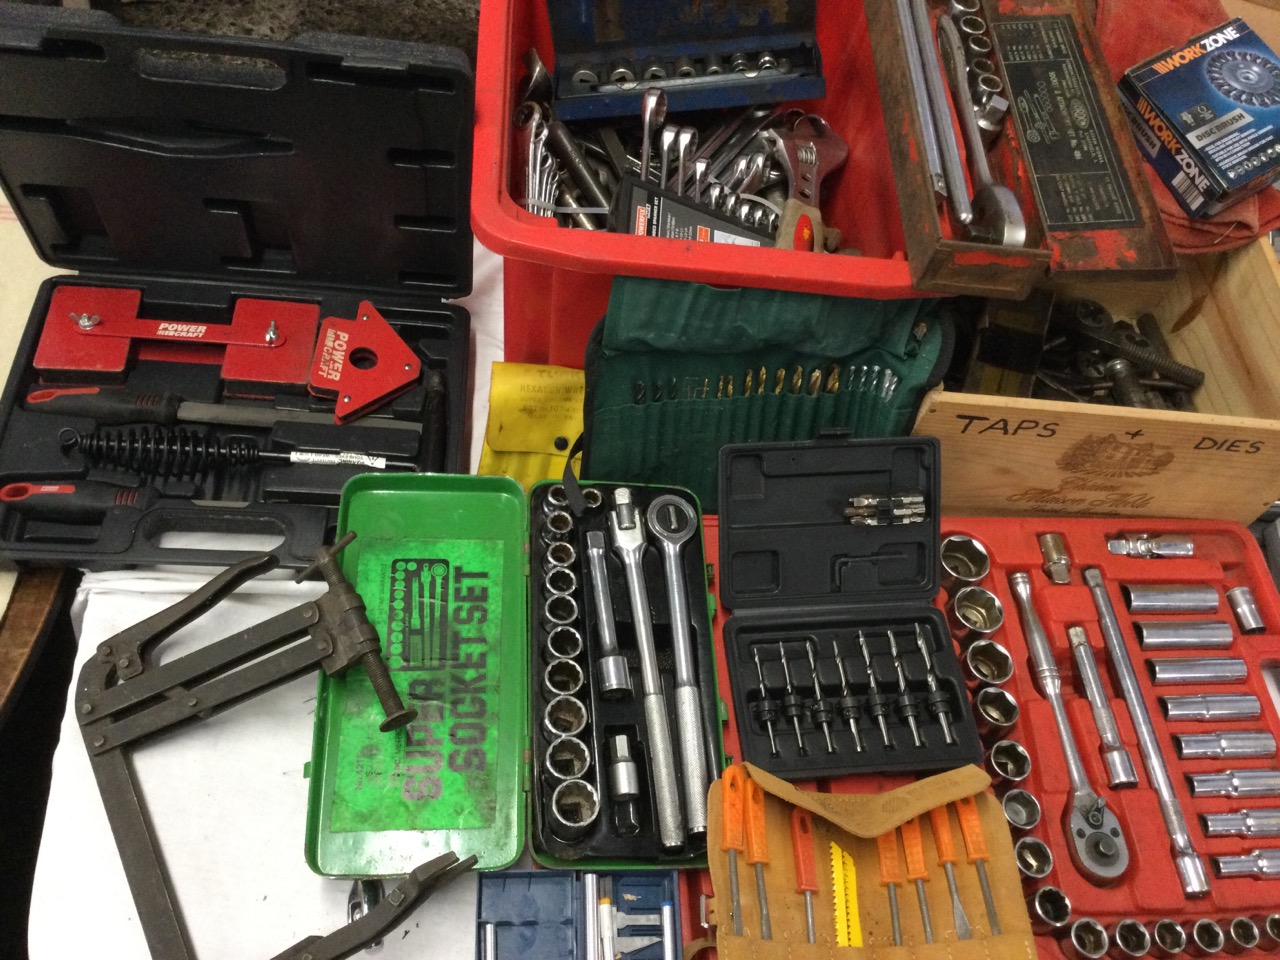 Miscellaneous cased socket sets, sets of spanners, clamps, cased drill bits, files, welding gear, - Image 2 of 3